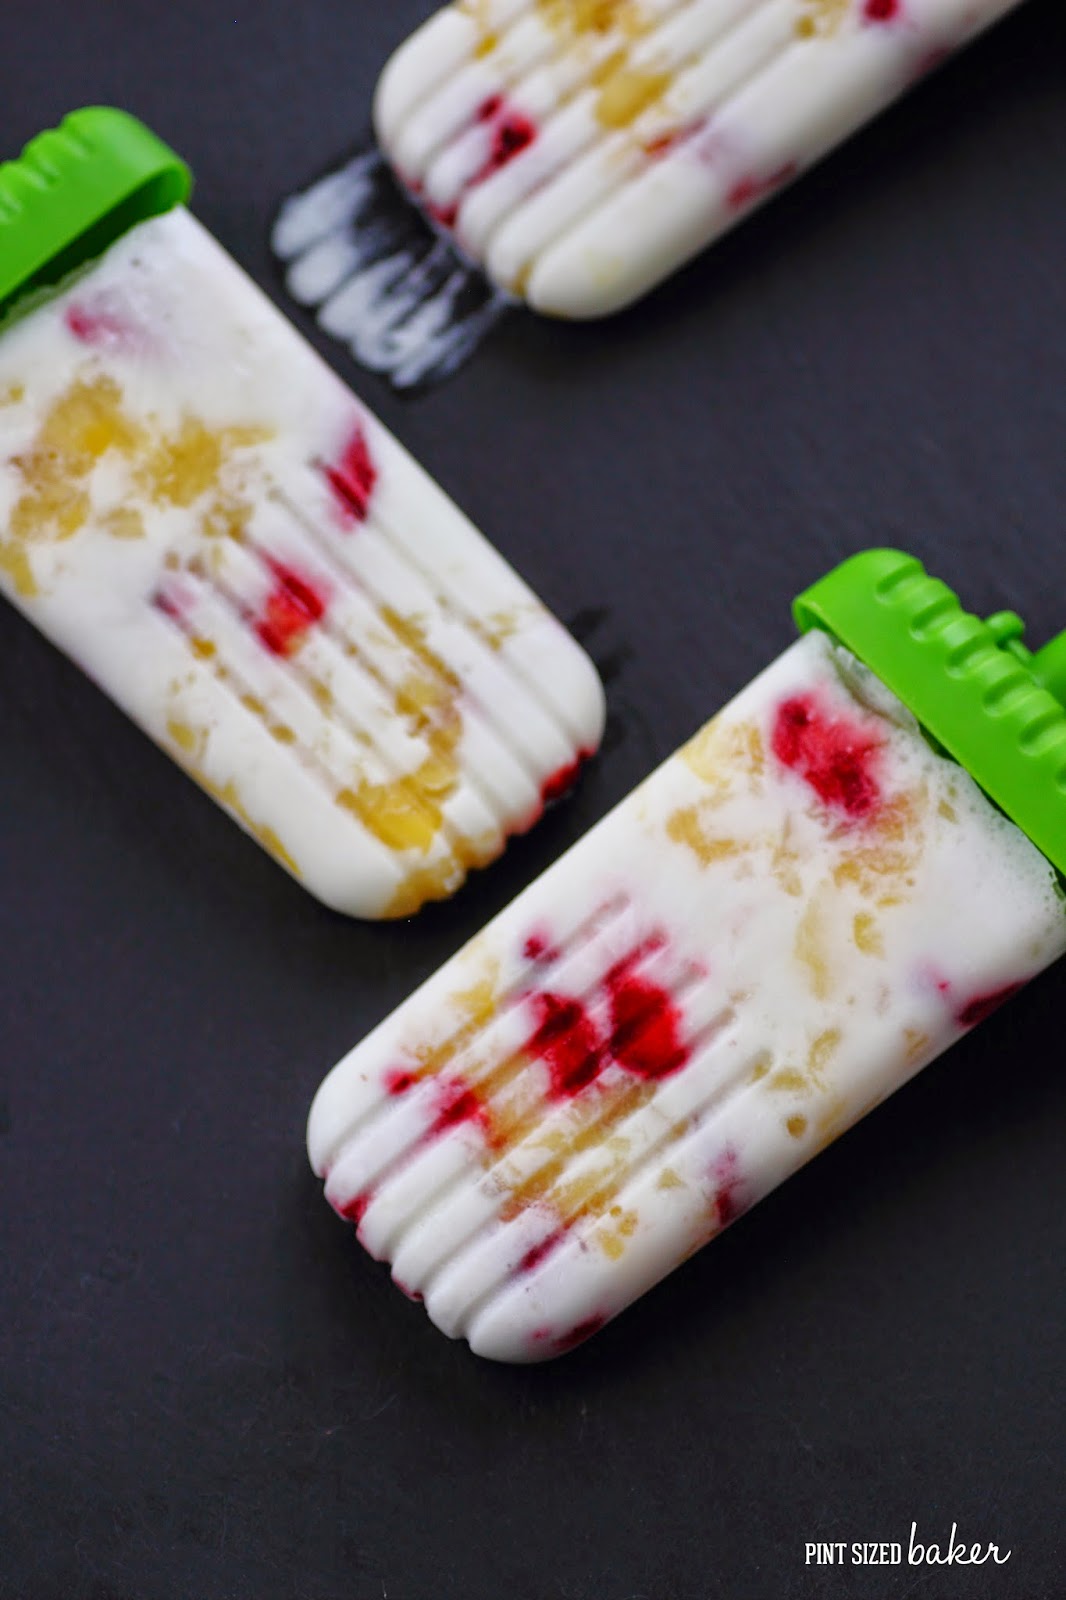 Kids young and old can make and enjoy these Pineapple Strawberry Coconut Popsicles Real, simple ingredients that are dairy free and naturally gluten free.